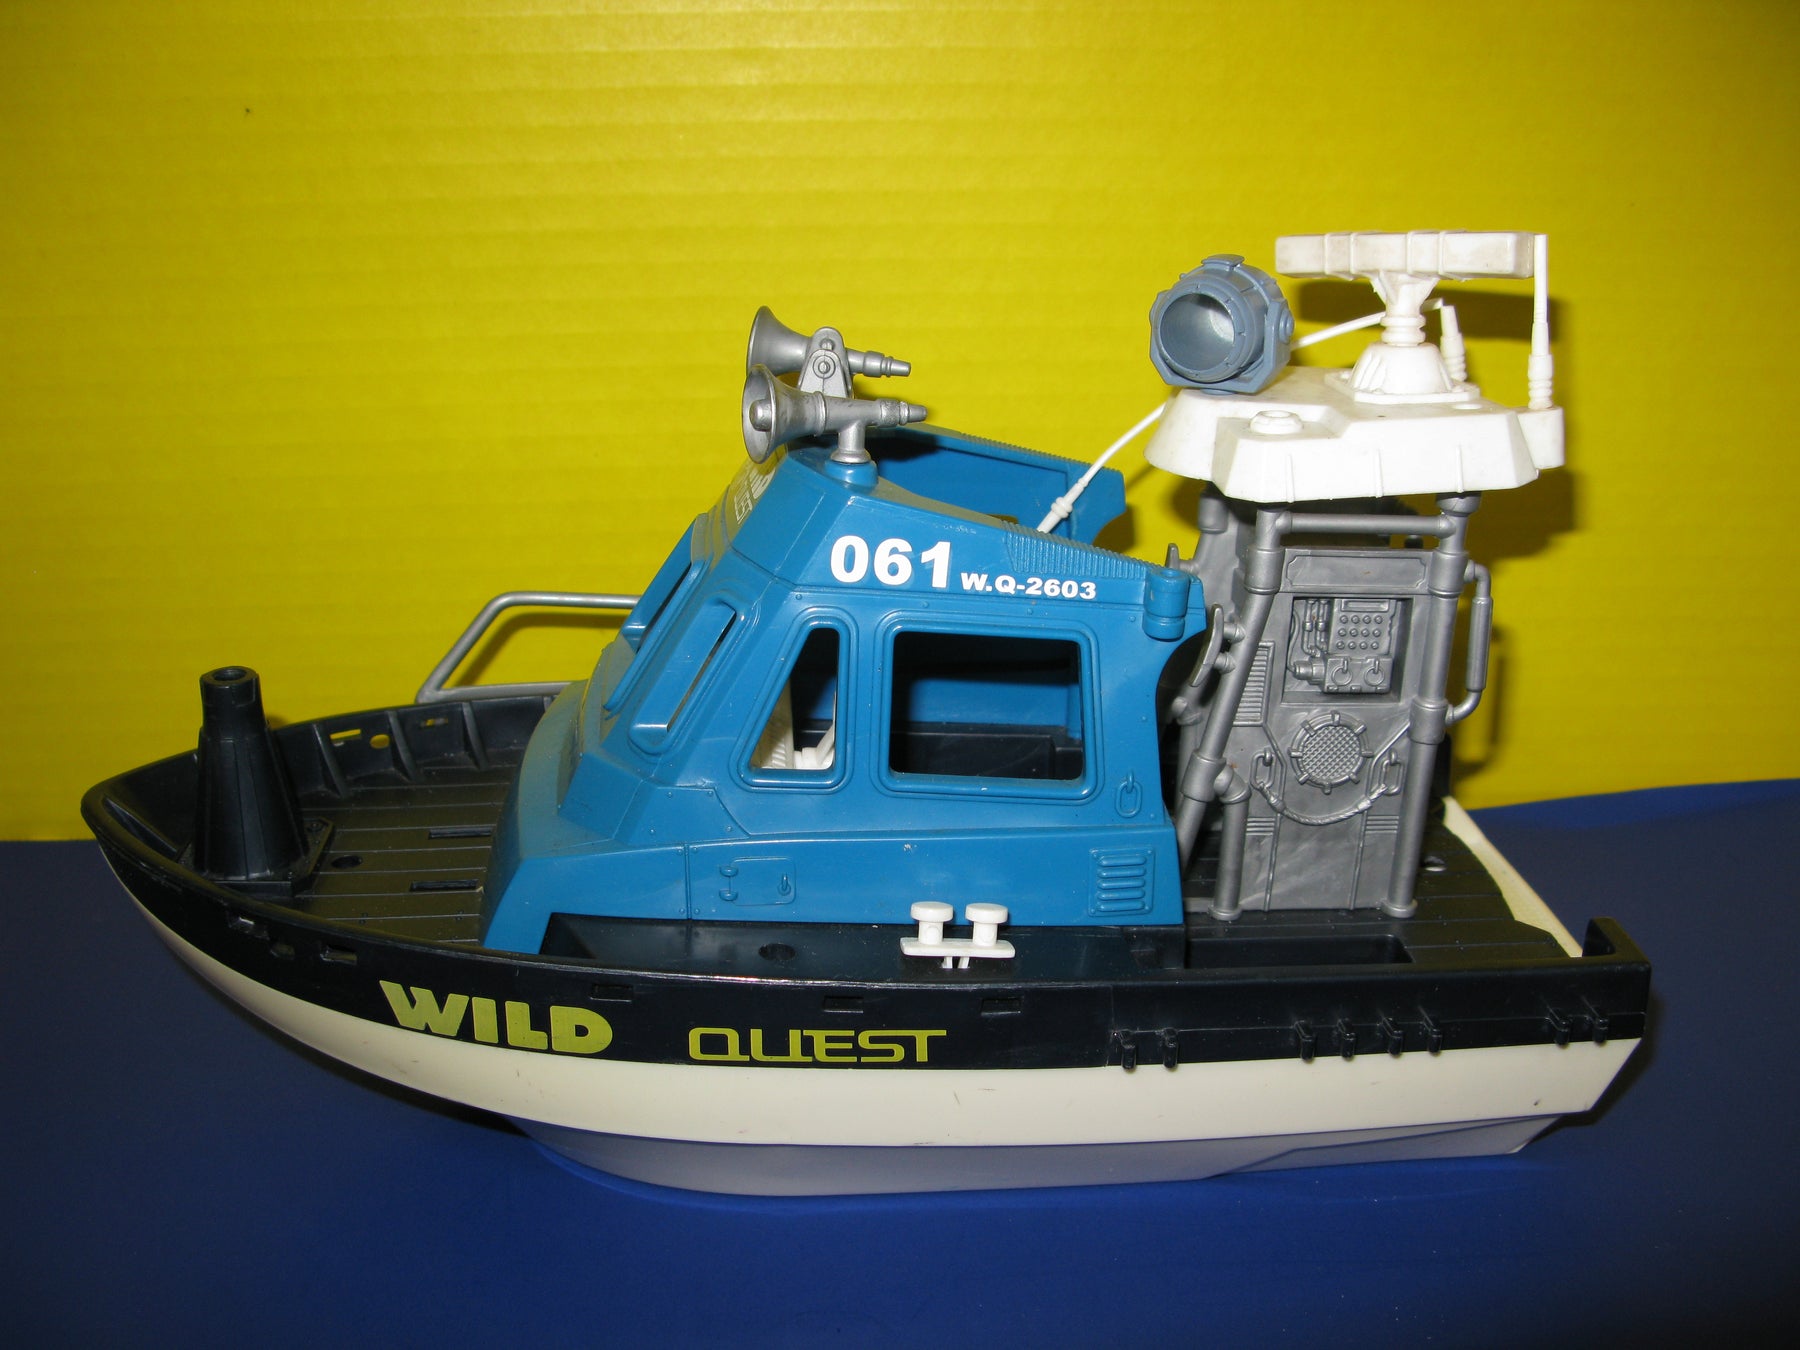 Wild Quest 061 Boat